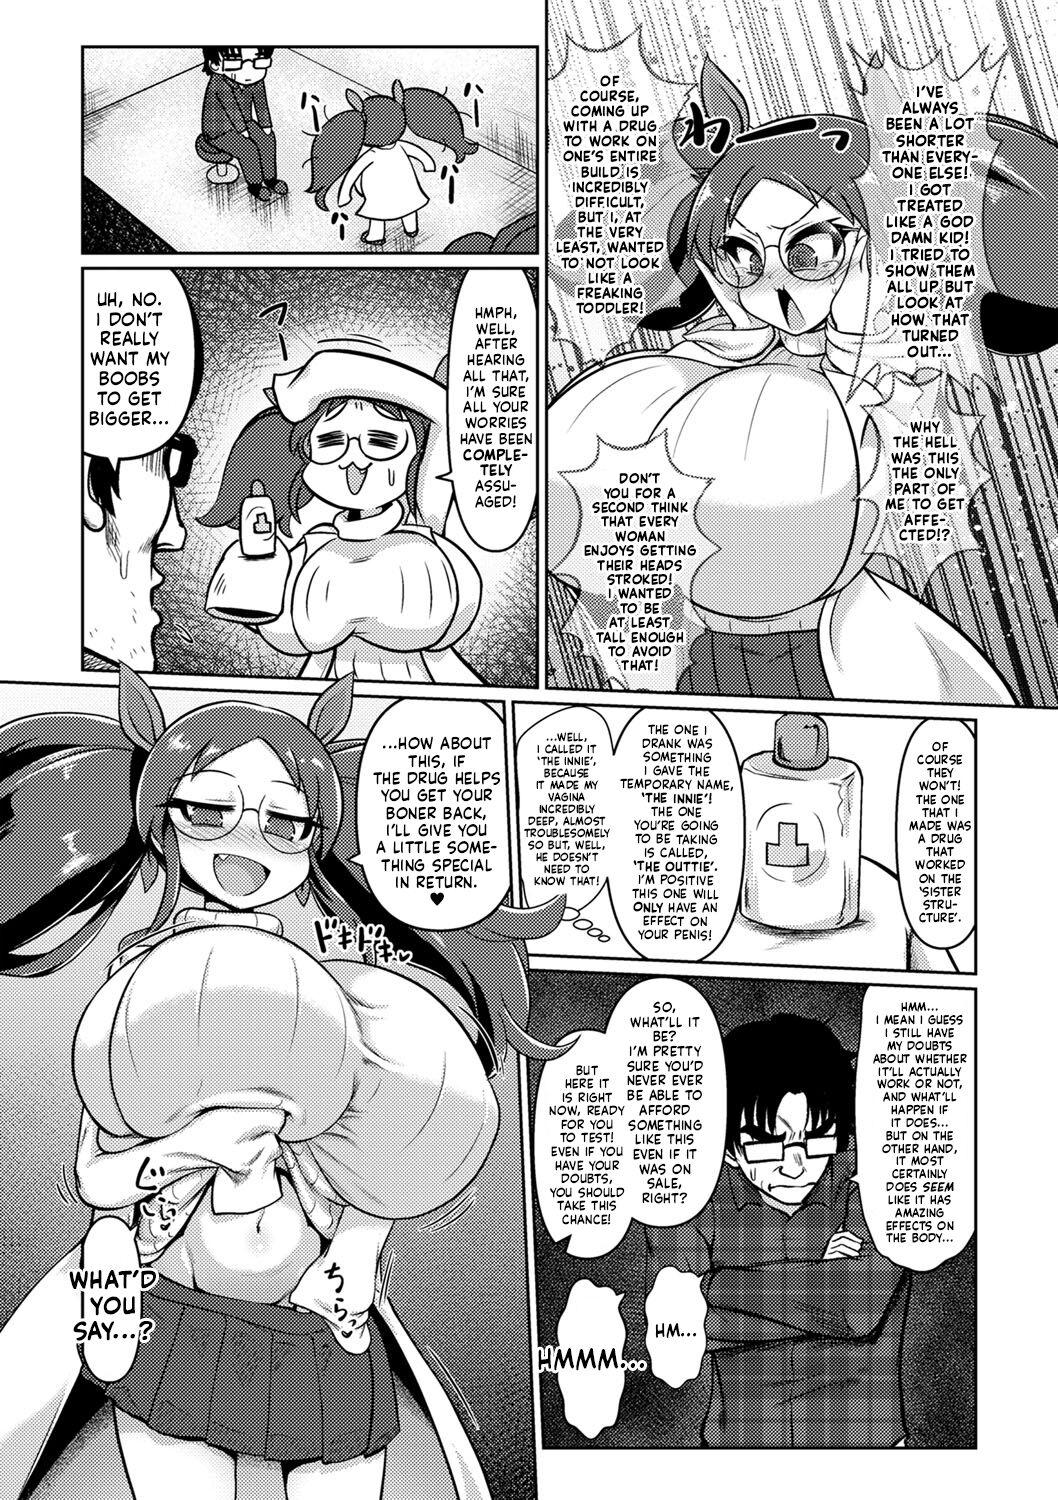 Petite Girl Porn Kyokon Ma Kaizou! Zenbu Irechau | A Dick Magically Remodeled To Be Huge! Let's See If We Can Get It All In, Huh? - Original Gorgeous - Page 7